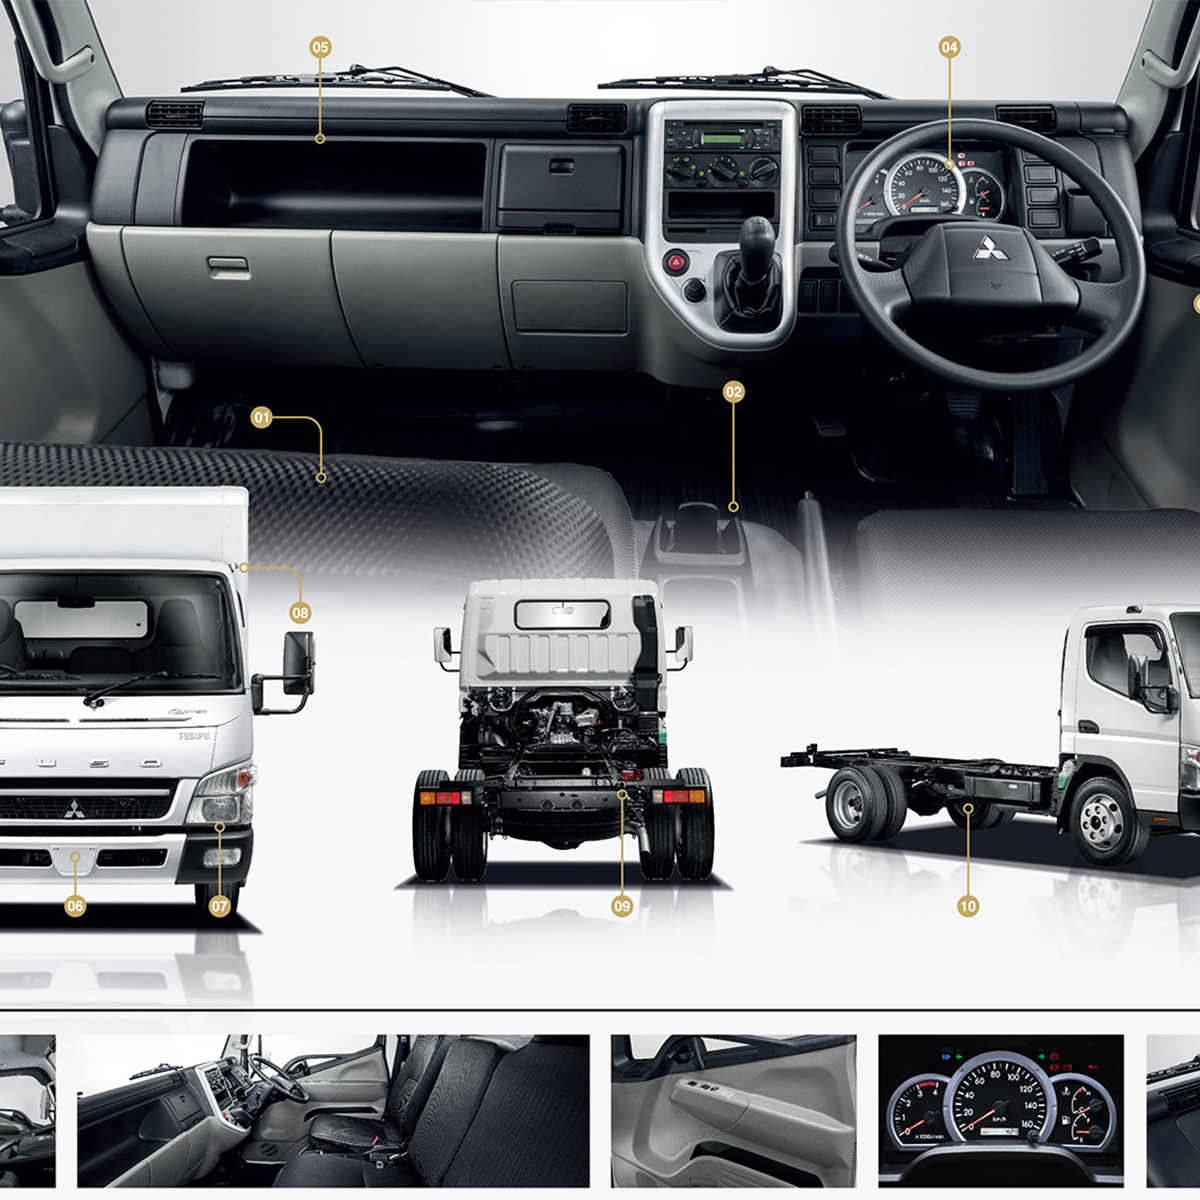 Fuso trucks Canter FE/FG 2017 brochure inner page design showing various parts of the vehicle